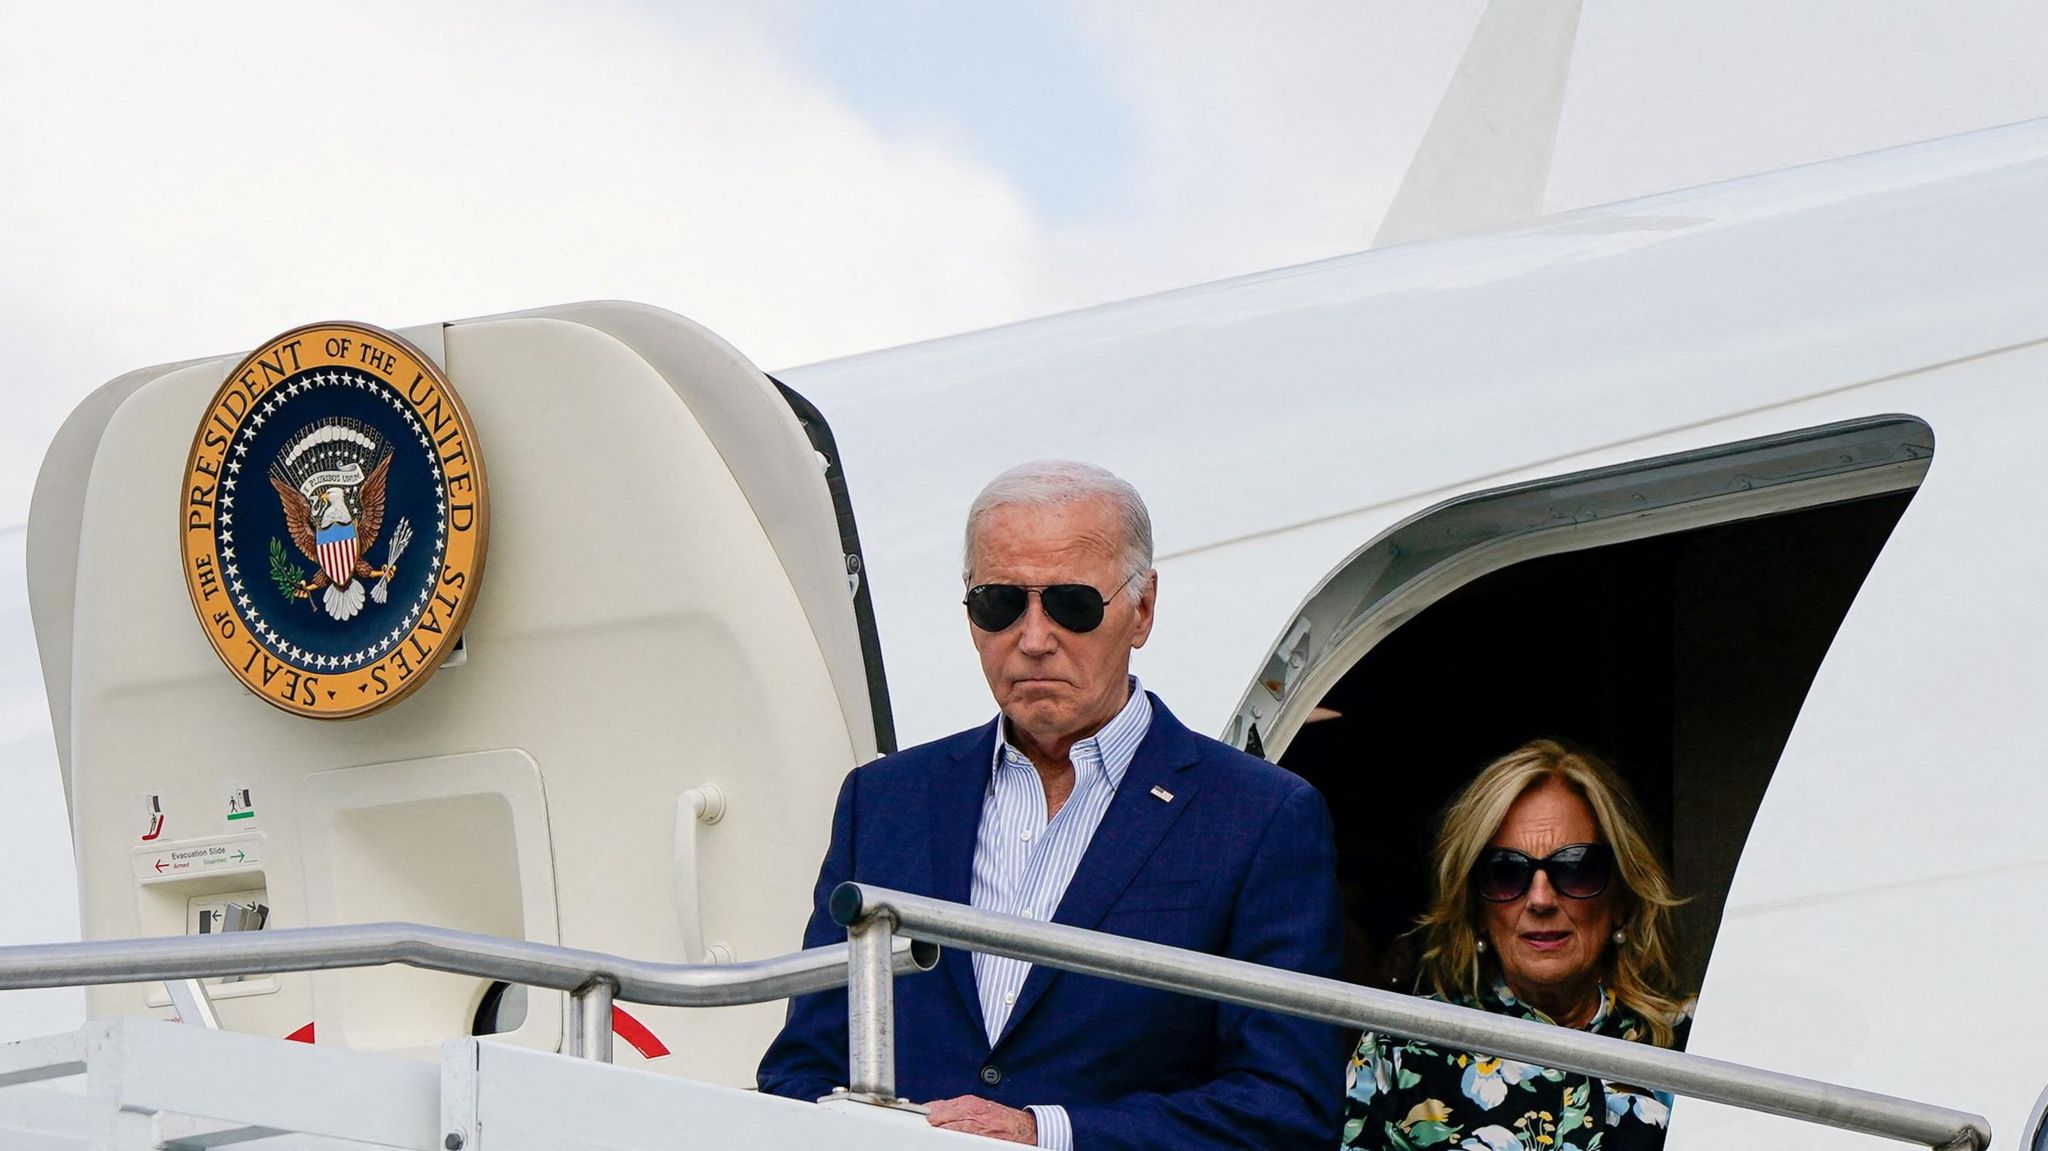 Biden and his wife Jill exiting Air Force One